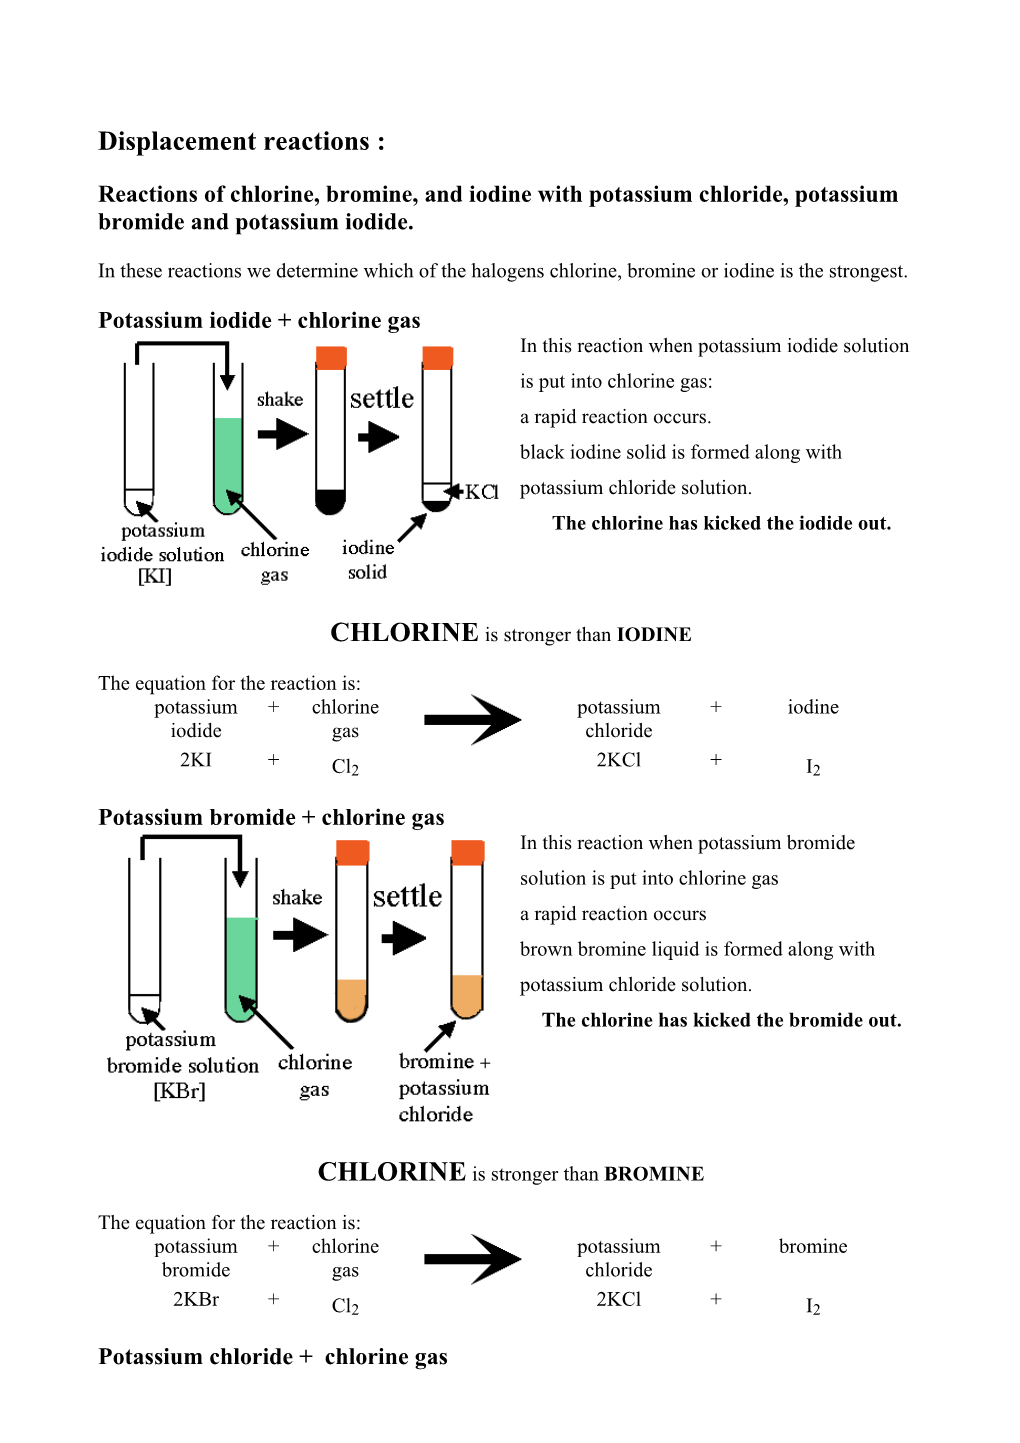 Displacement Reactions : Reactions of Chlorine, Bromine, and Iodine with Potassium Chloride